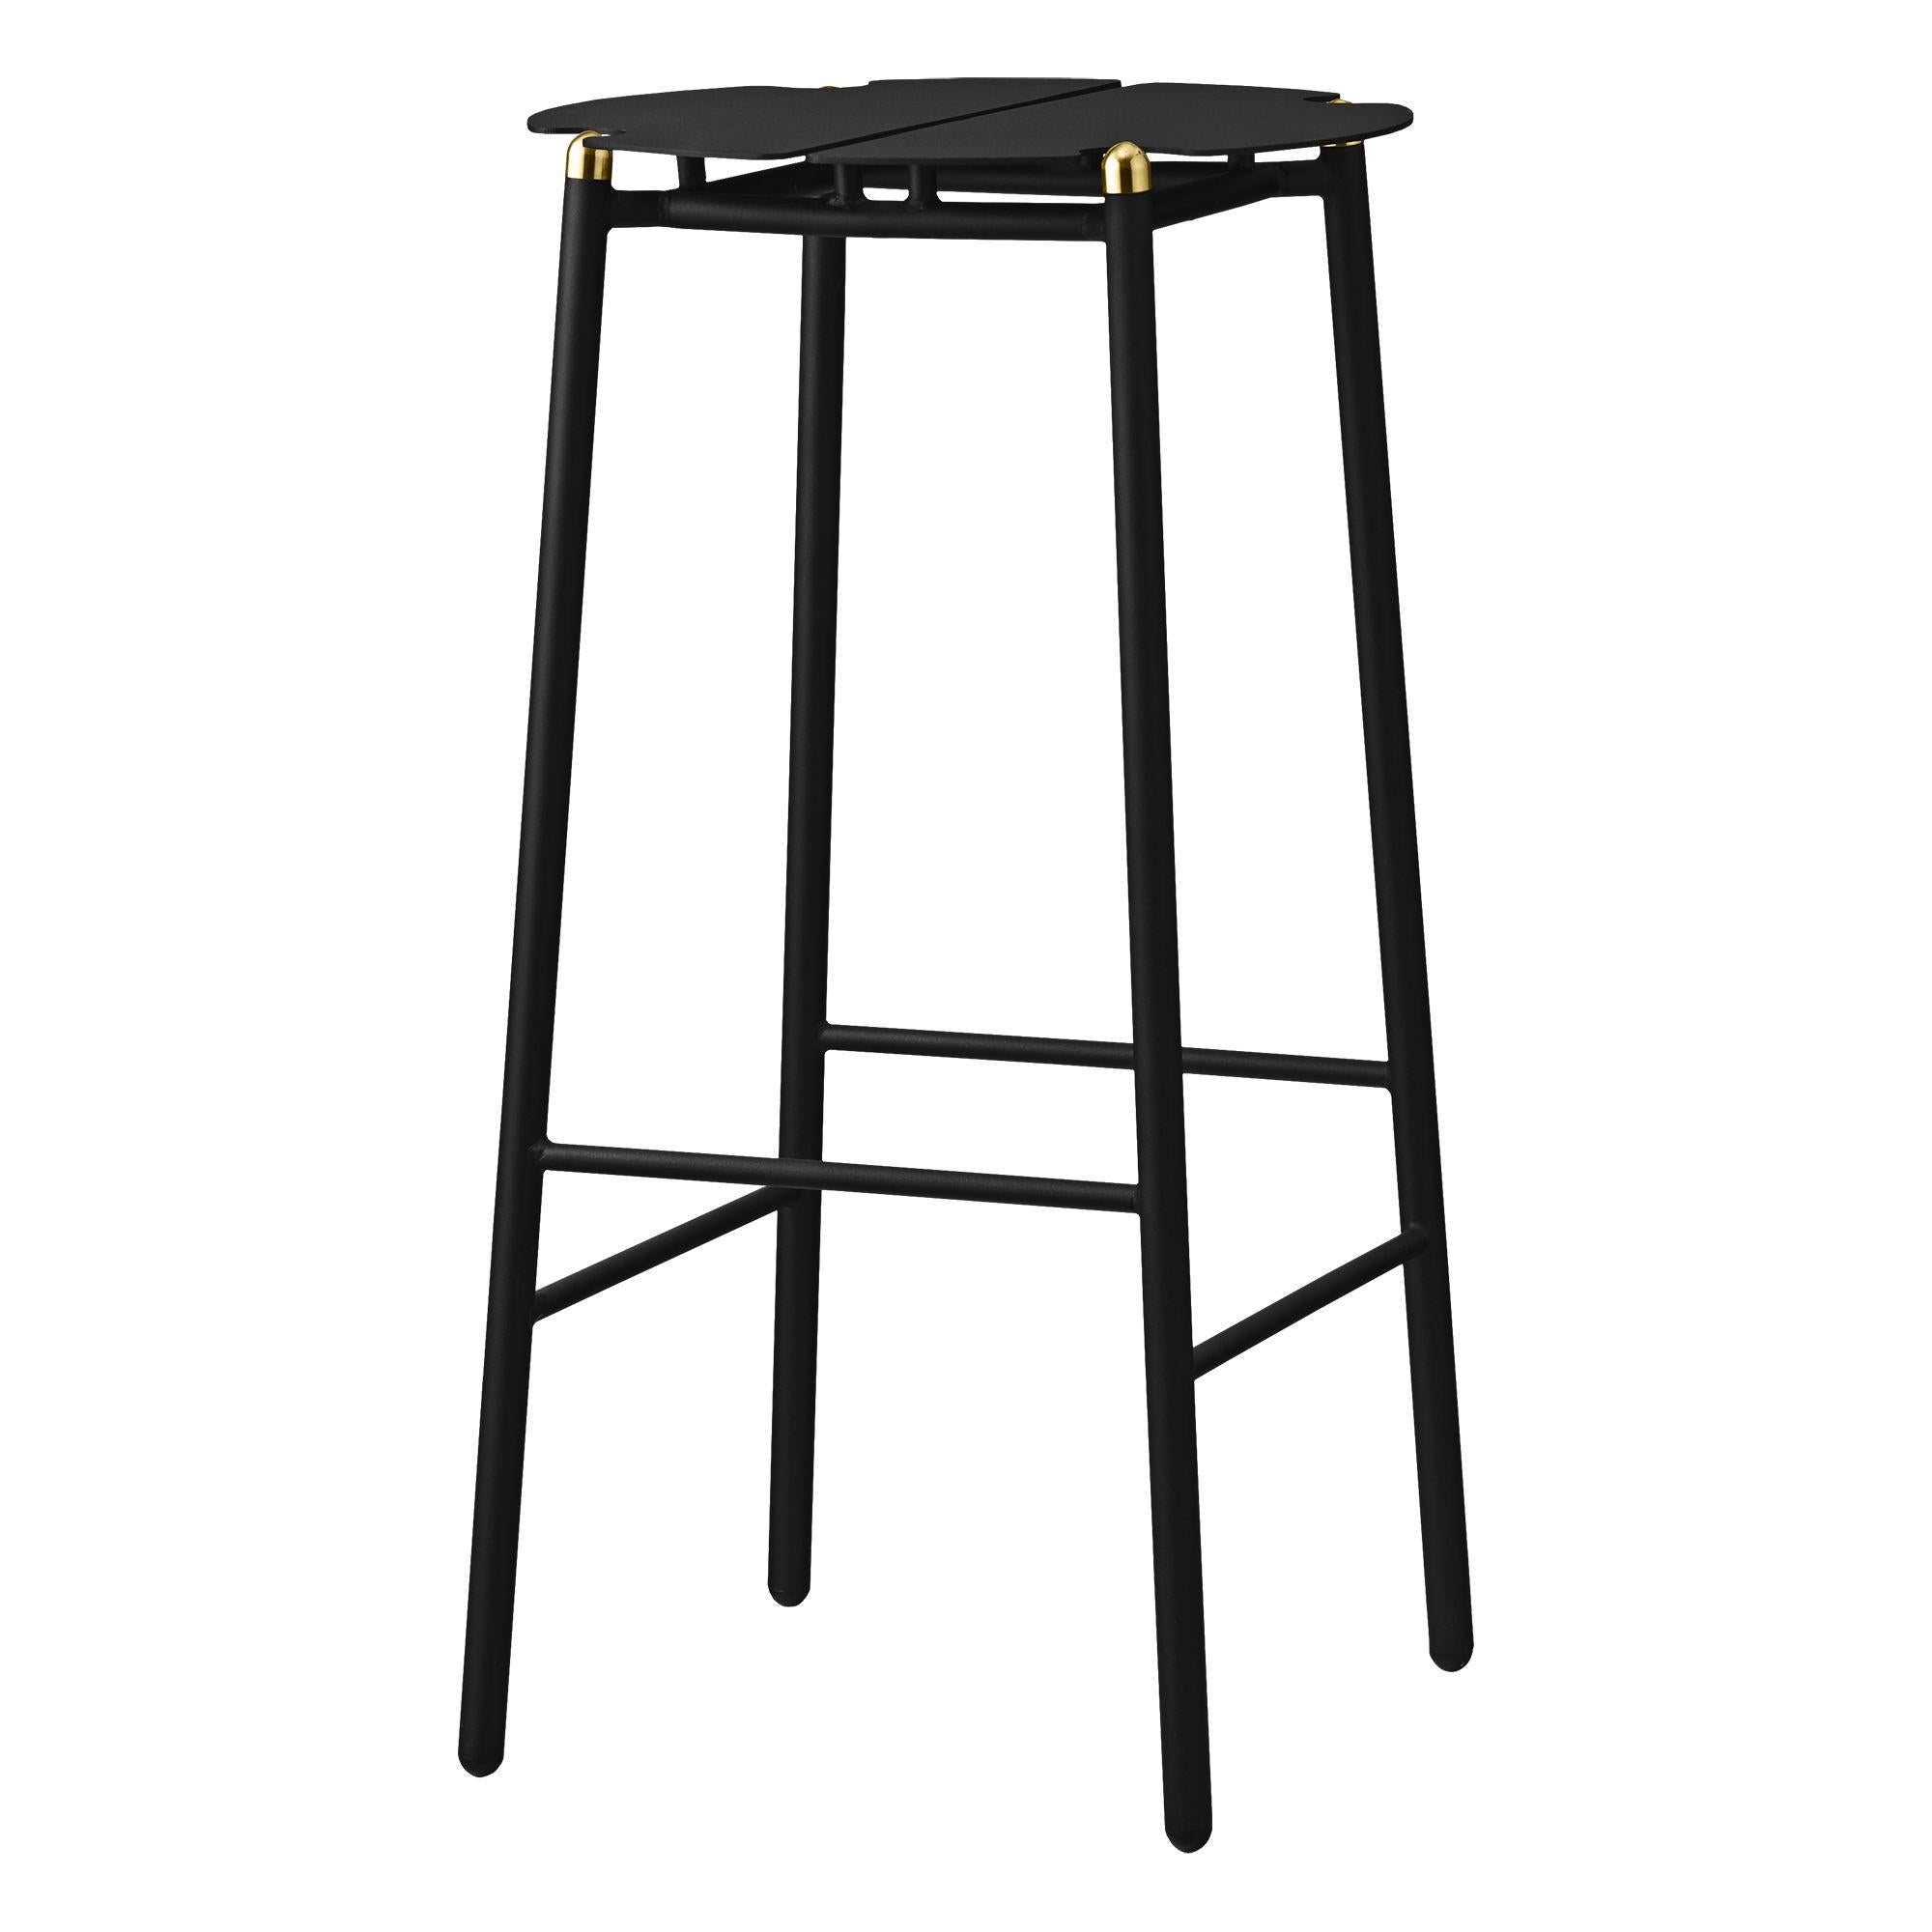 Black and gold Minimalist bar stool 
Dimensions: Diameter 38 x H 75 cm 
Materials: Steel w. matte powder coating and aluminum w. matte powder coating.
Available in colors: Taupe, Bordeaux, Forest, Ginger Bread, Black and, Black and